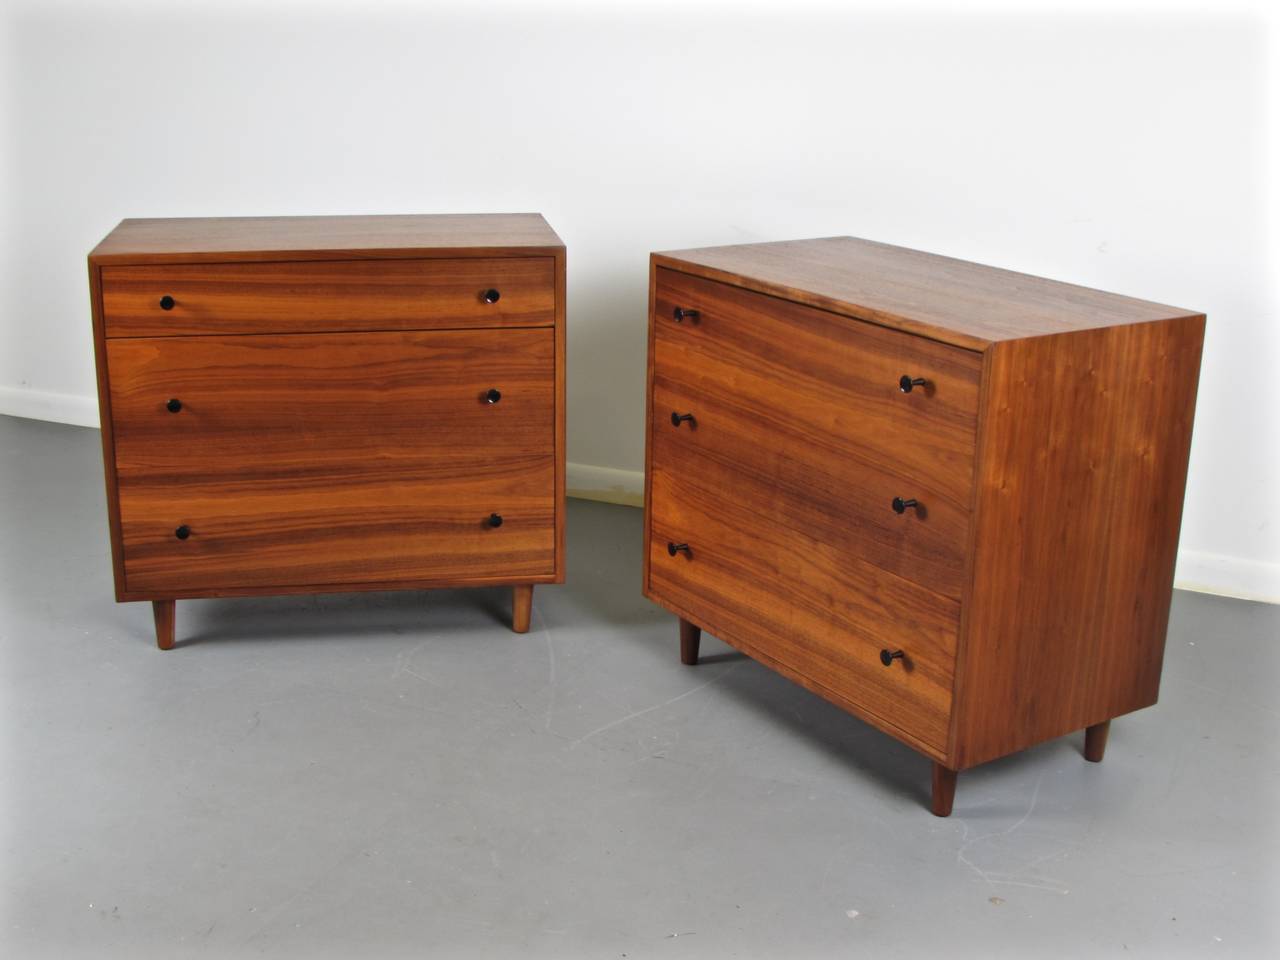 American Handsome Pair of Walnut Chests by Milo Baughman for Glenn of California, 1950s